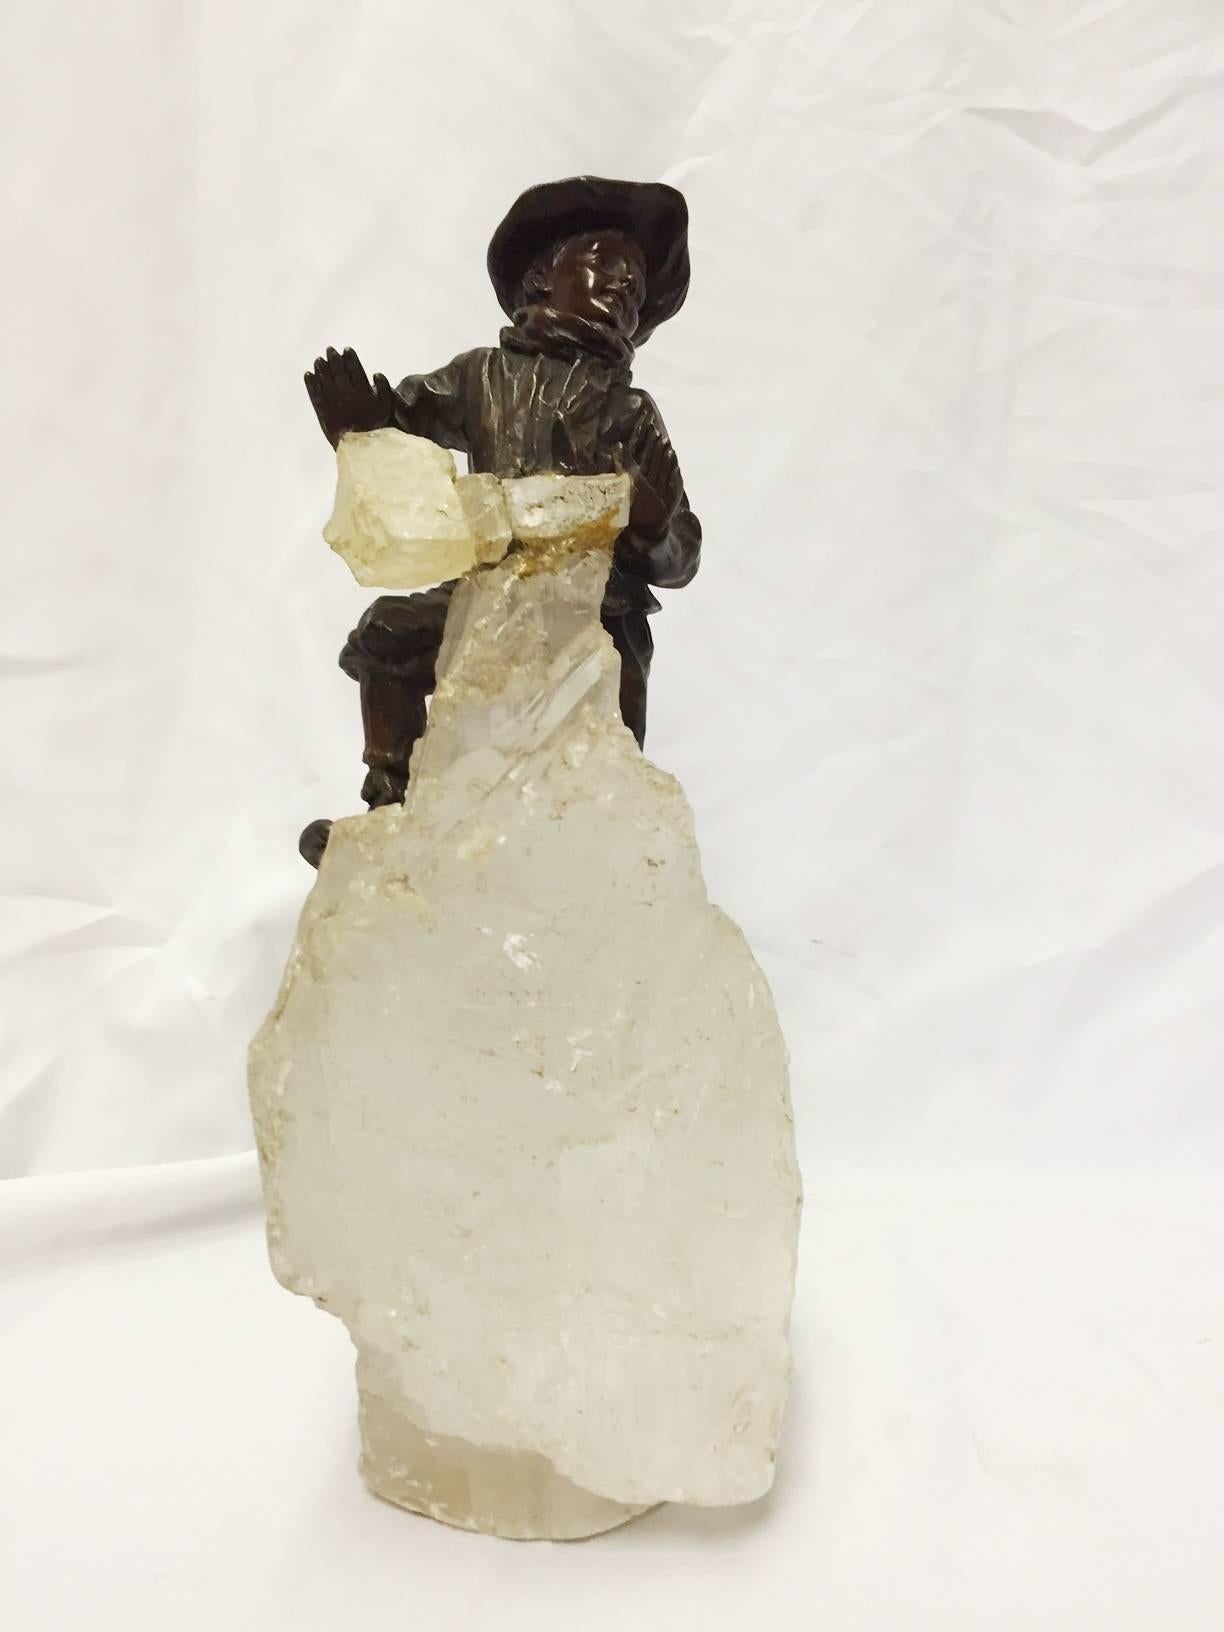 19th Century French Patinated Metal Boy Climbing Rock Crystal Mountain, 19 Century